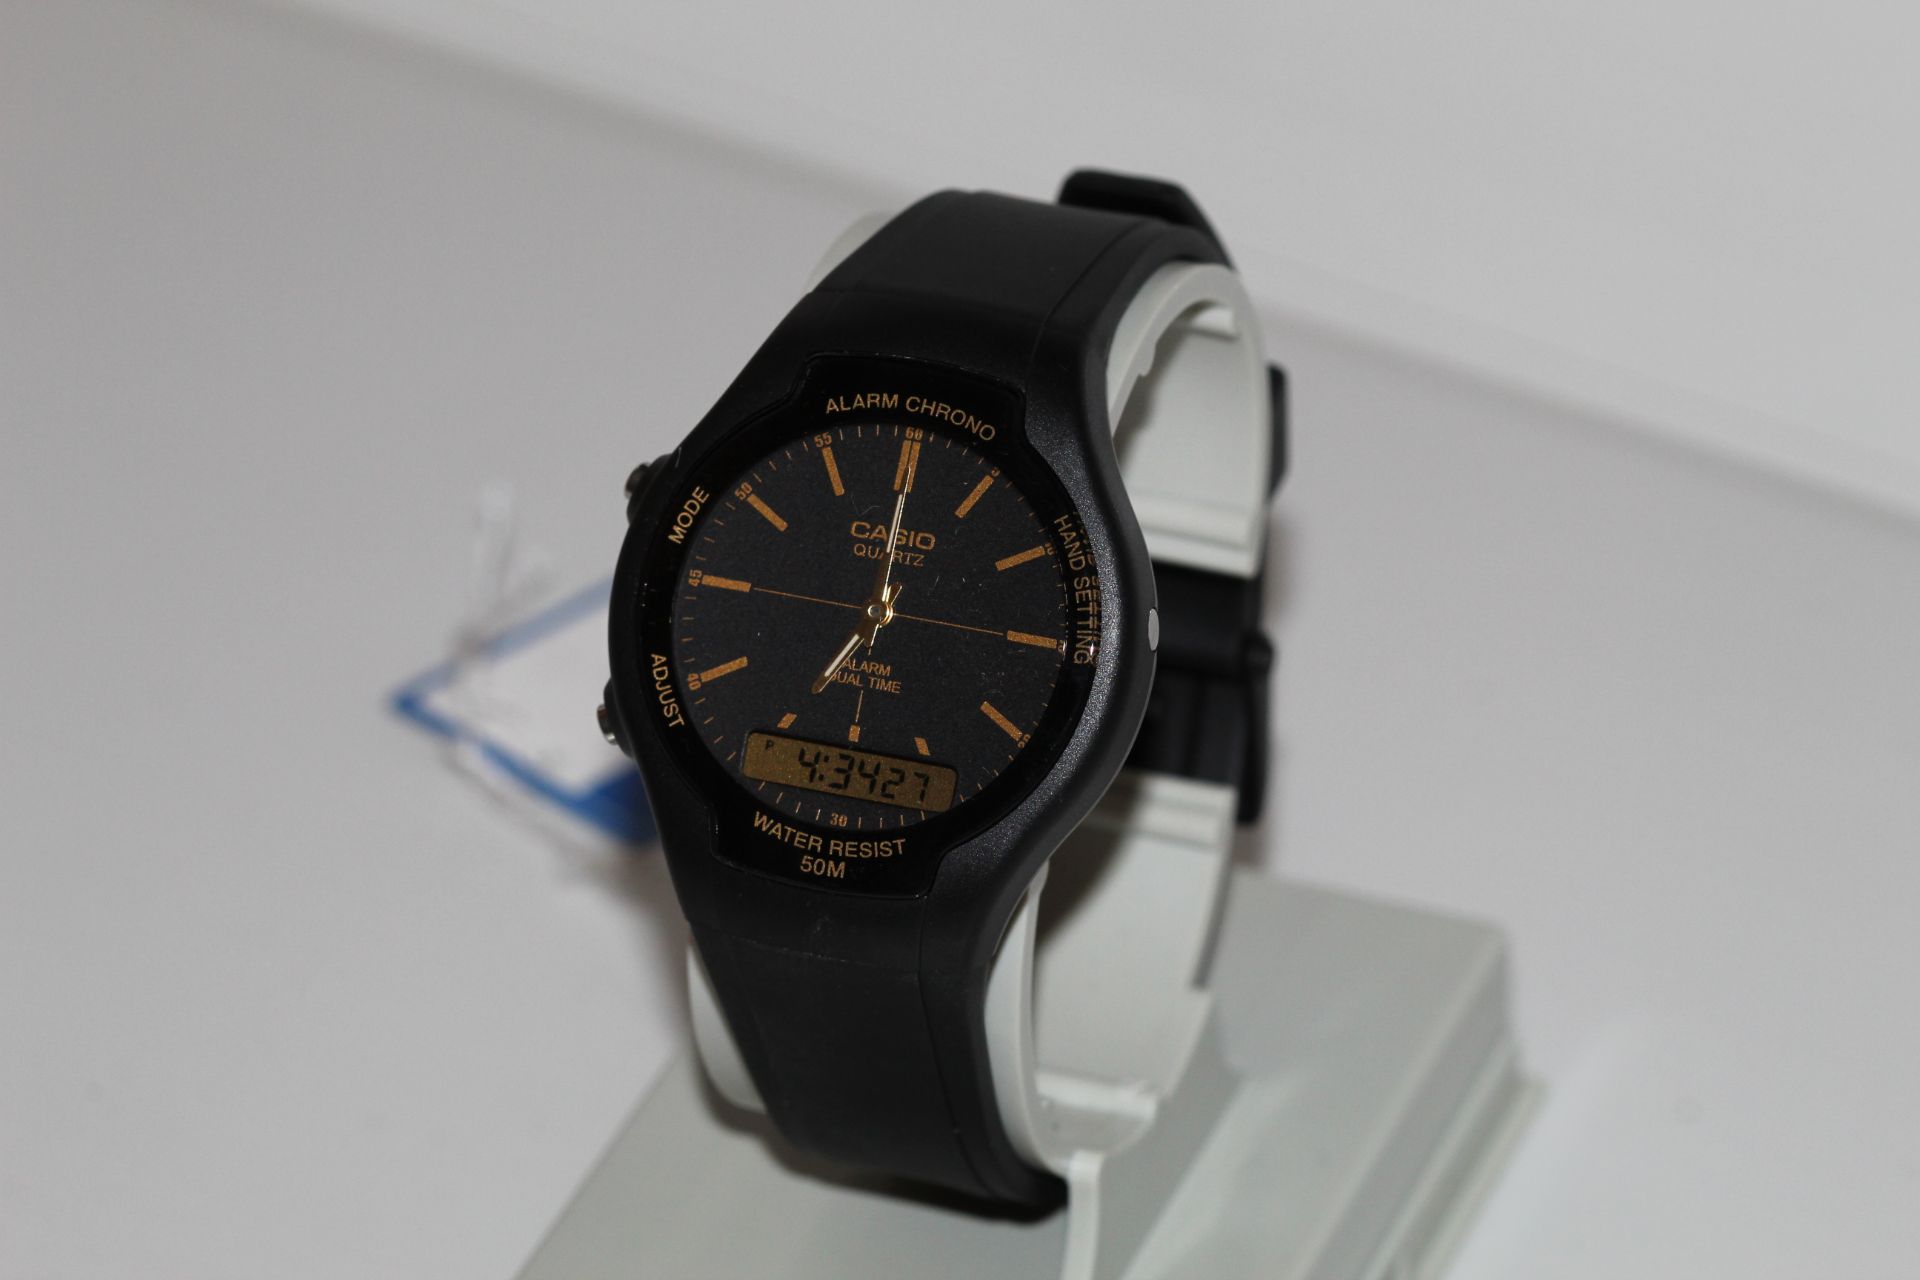 Casio dual time watch - Image 2 of 3